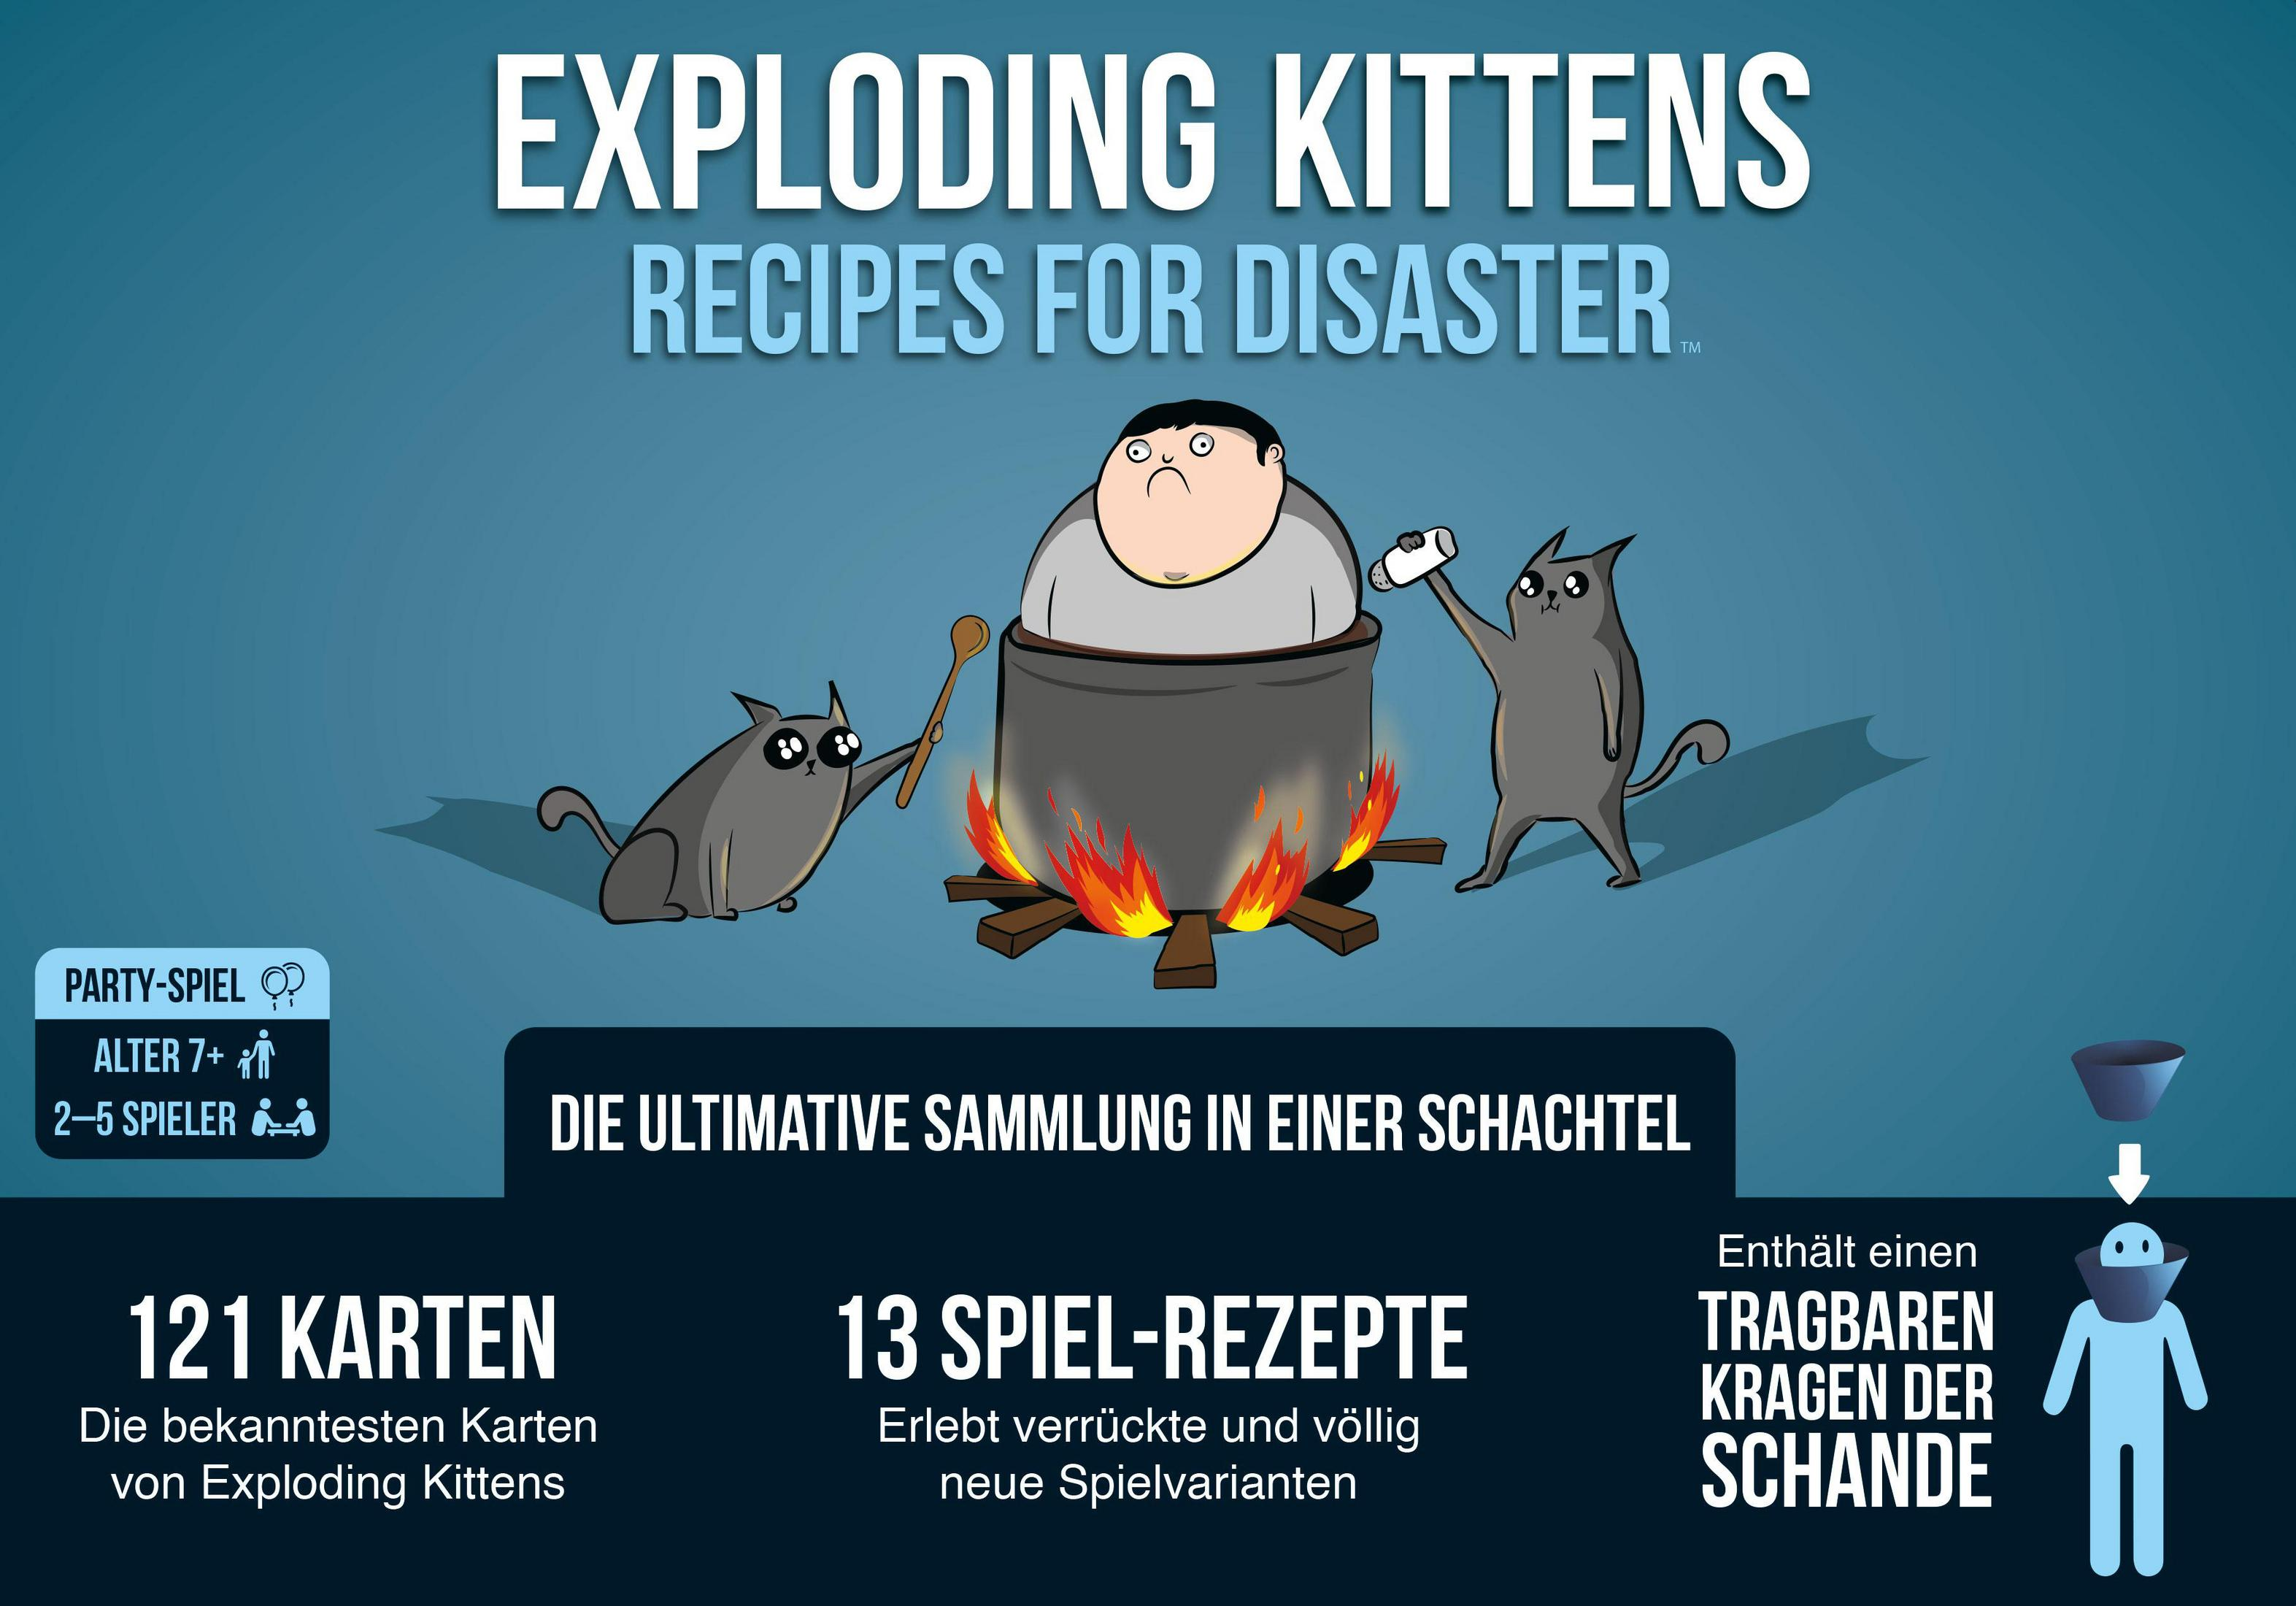 RECIPES FOR KITTENS: ASMODEE EXKD0022 Partyspiel DISASTER EXPLODING